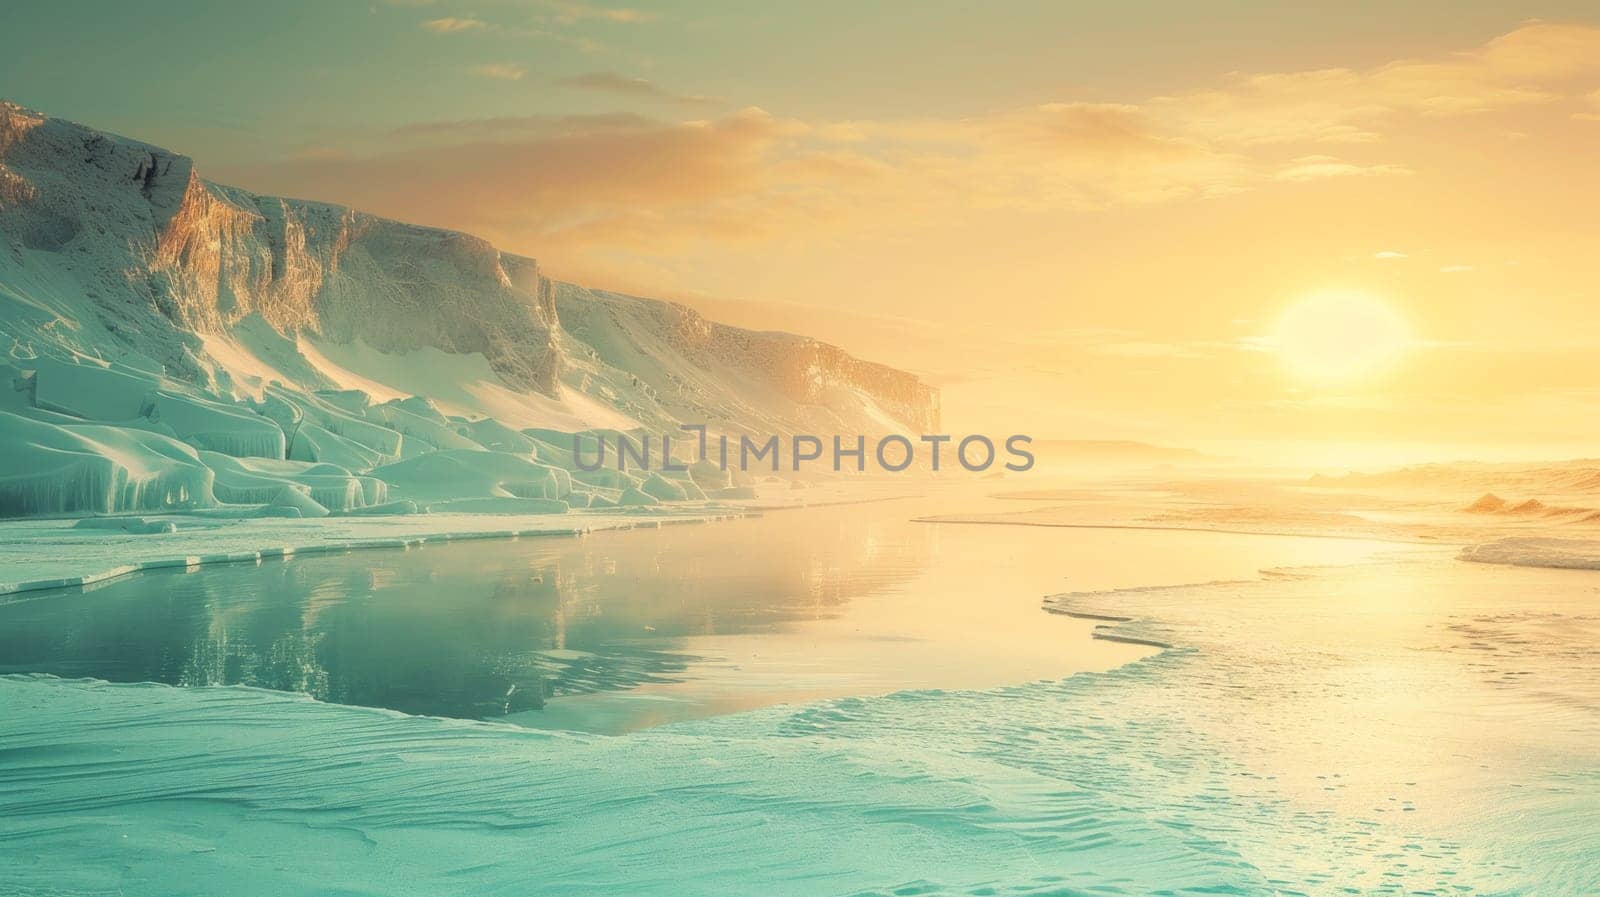 As the sun slowly dips below the horizon, its warm golden rays cast a magical glow over the icy mountains, creating a breathtaking scene of natures beauty by but_photo